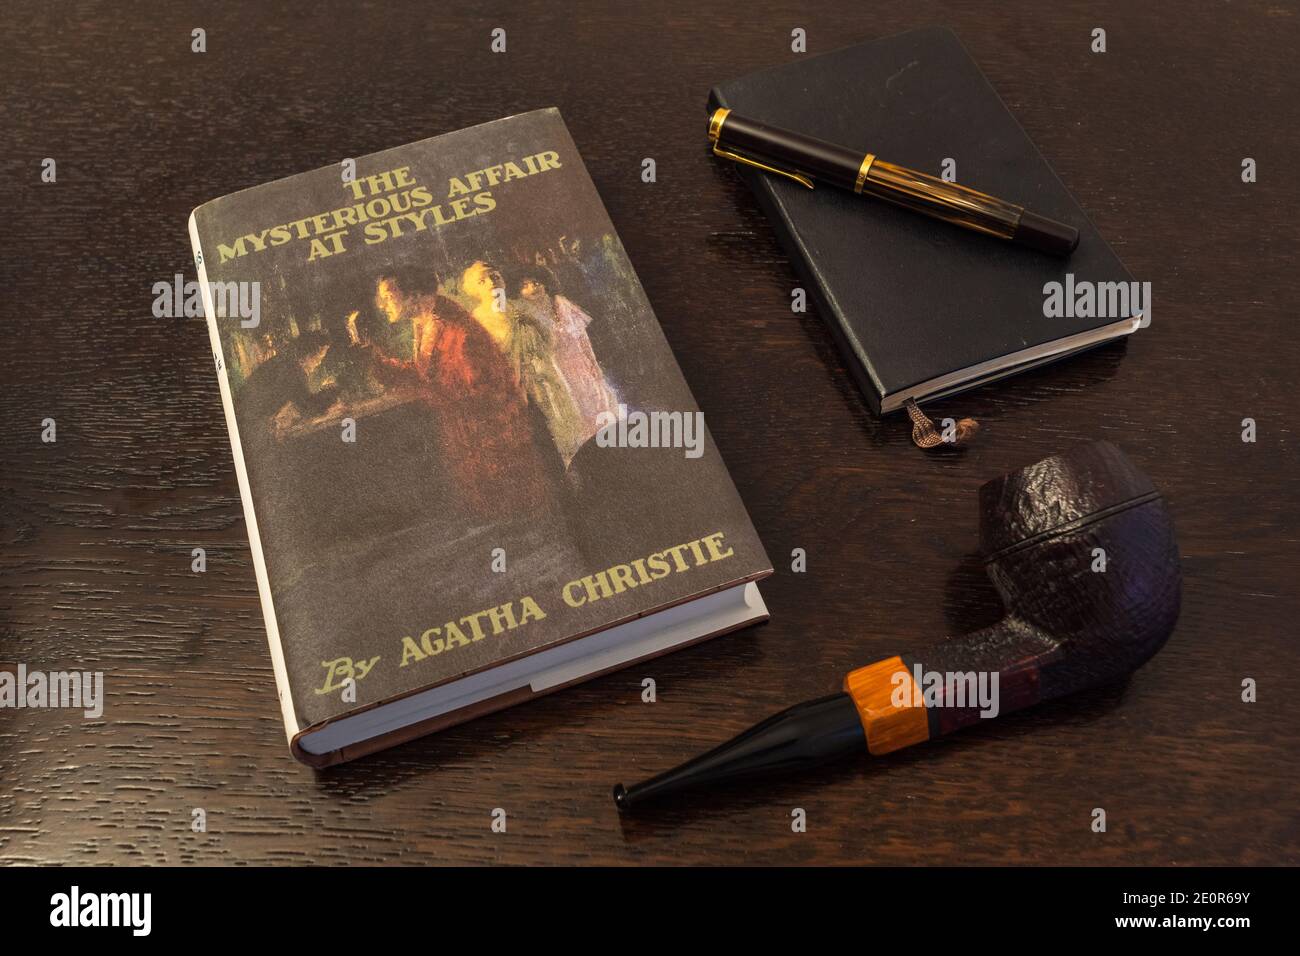 London, England, UK - January 2 2021: The Mysterious Affair at Styles Book by Agatha Christie in a Facsimile First Edition with Tobacco Pipe, Fountian Stock Photo